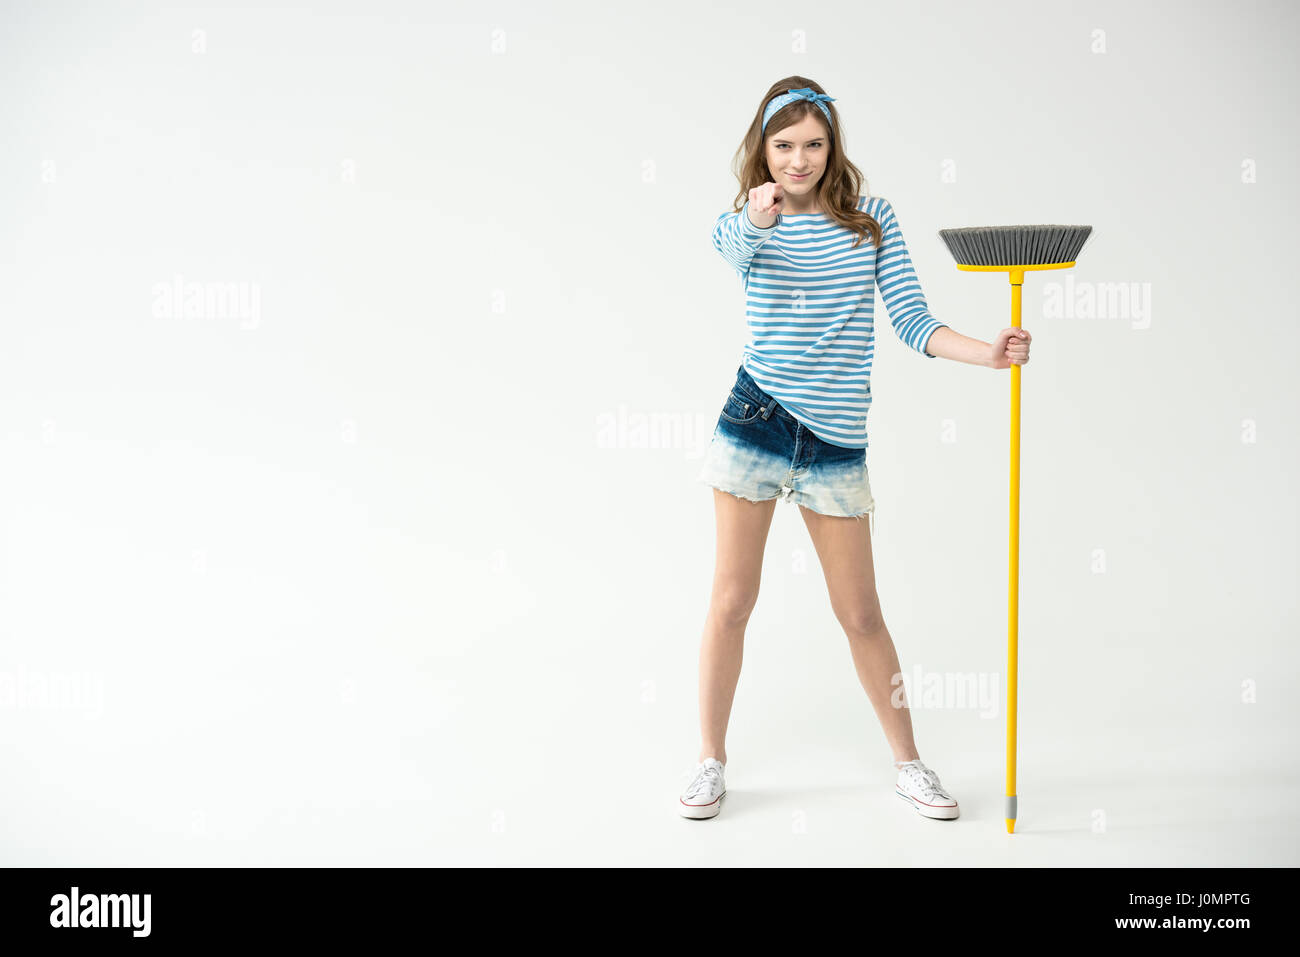 Attractive young woman holding broom and pointing at camera Stock Photo